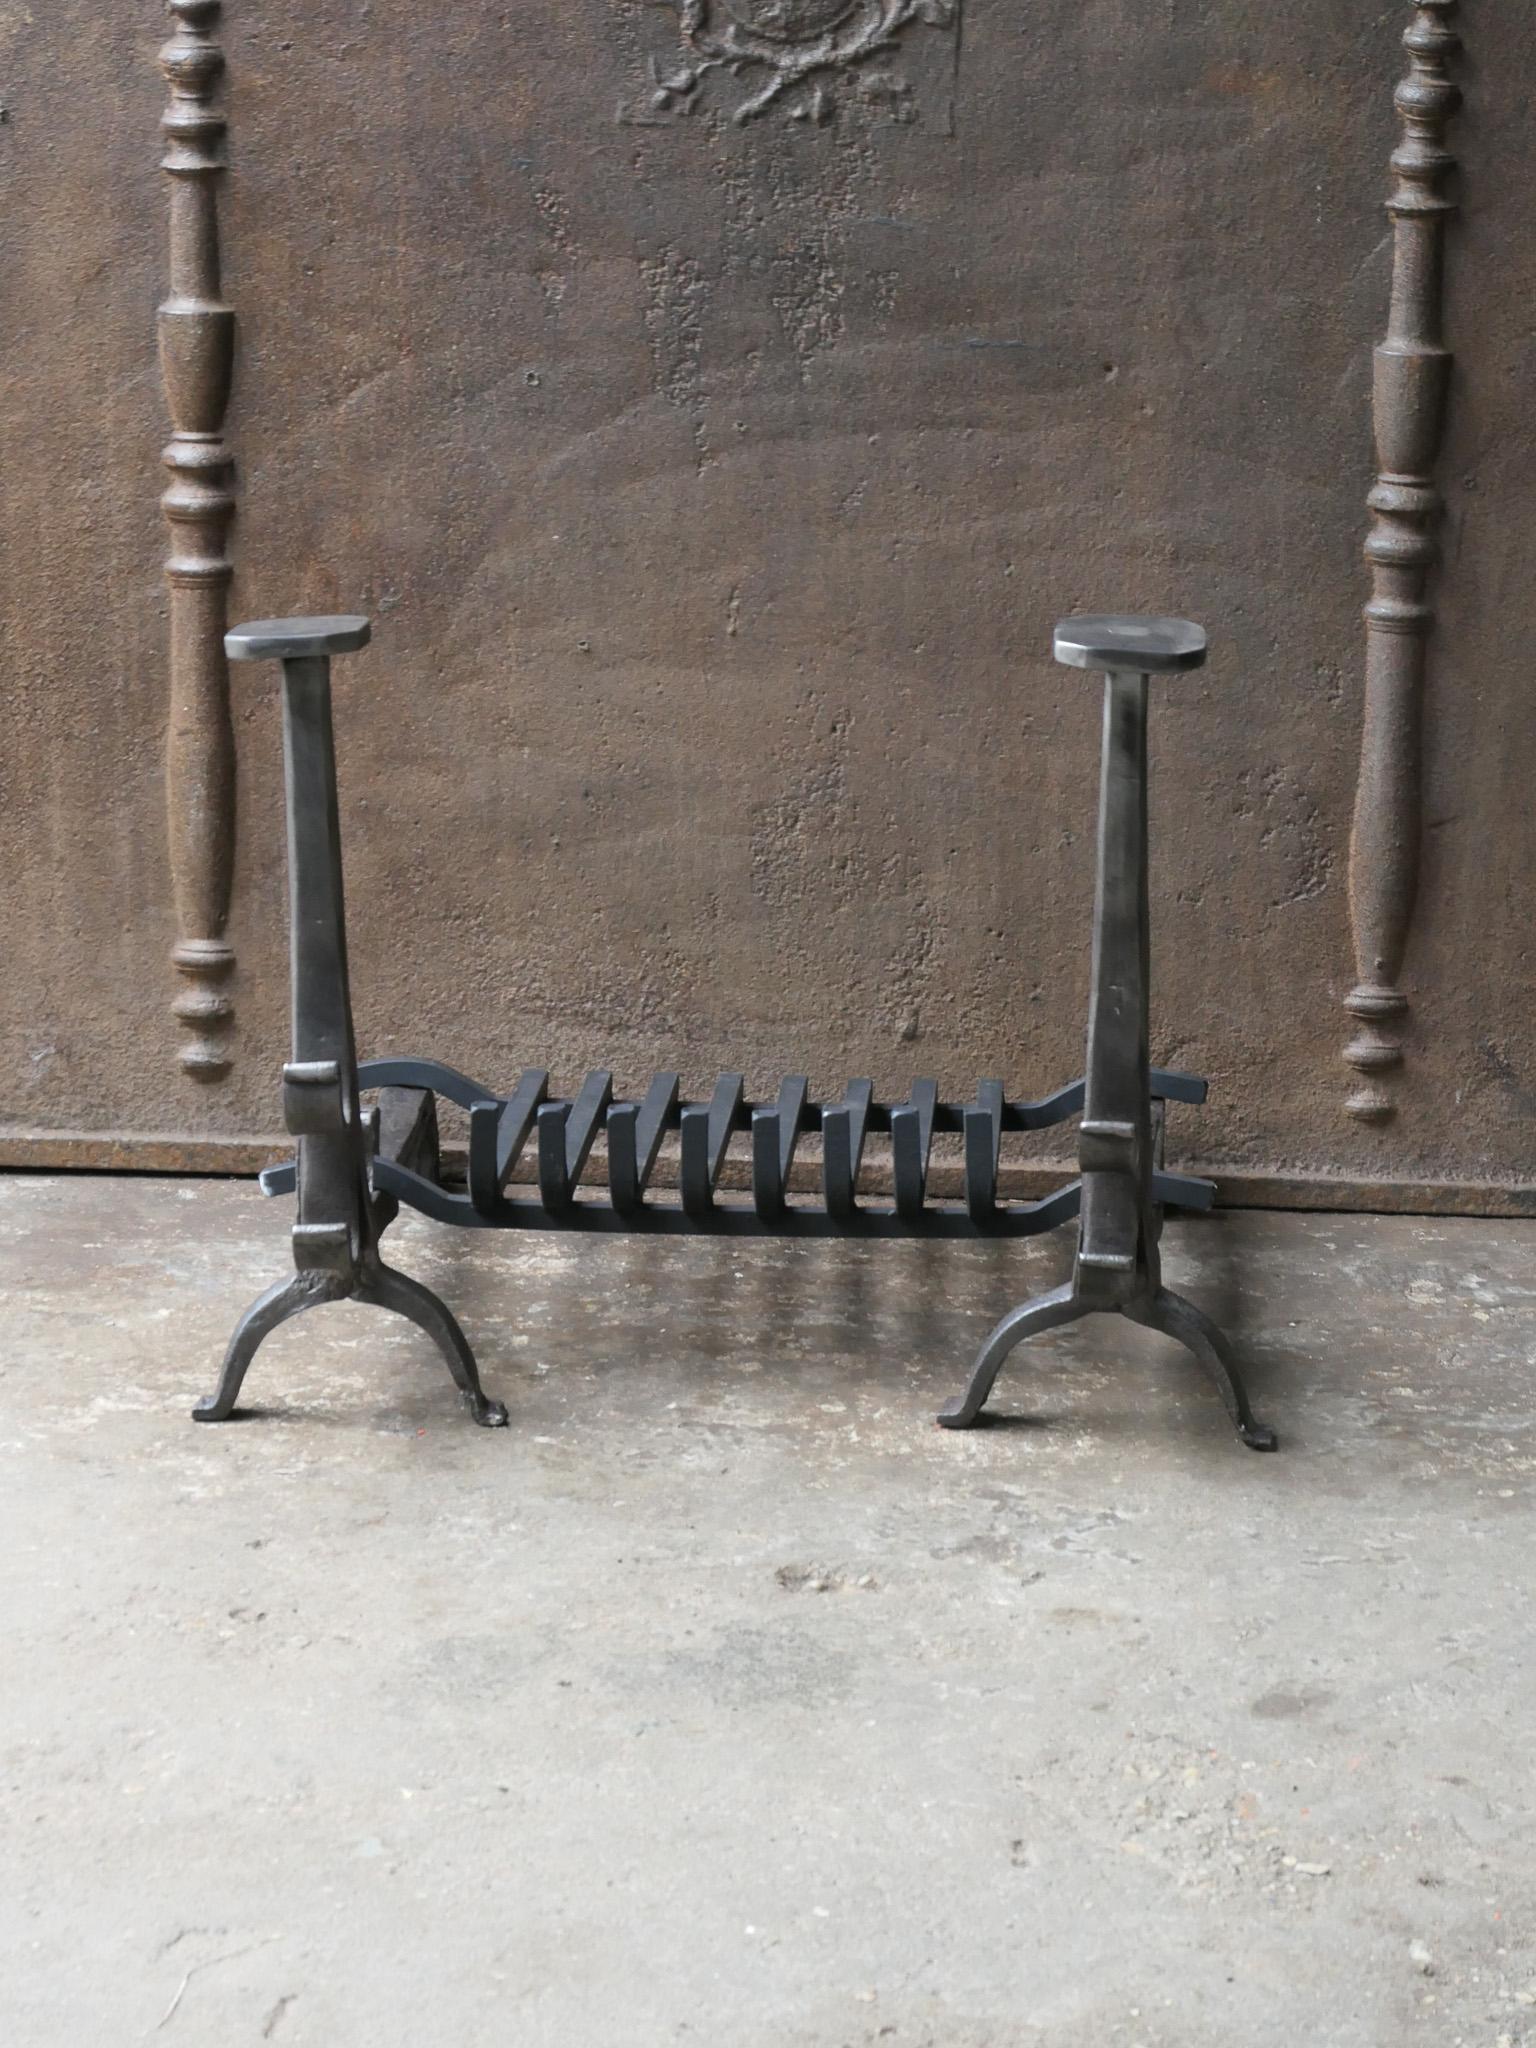 17th - 18th century French Gothic fire grate with period andirons and a recently forged grate. Made of wrought iron. The condition is good. 

The total width at the front of the grate is 60 cm / 23.6 inches.







